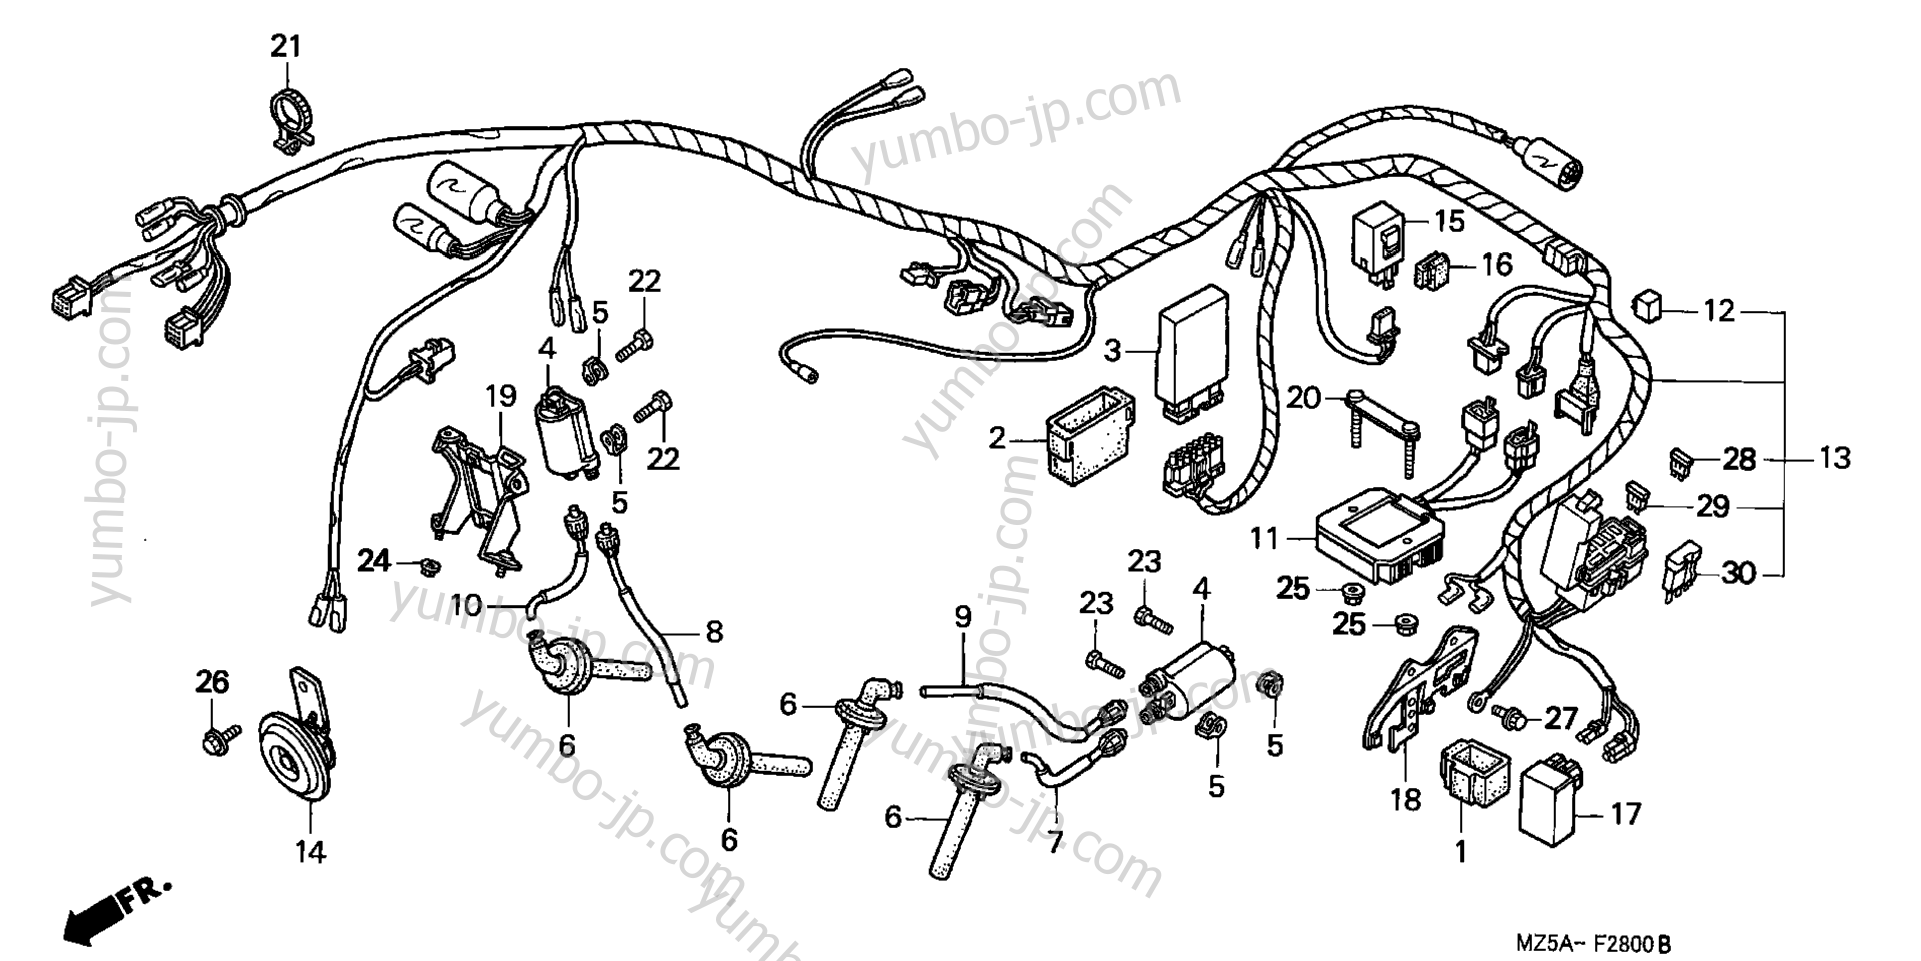 WIRE HARNESS for motorcycles HONDA VF750C AC 2002 year